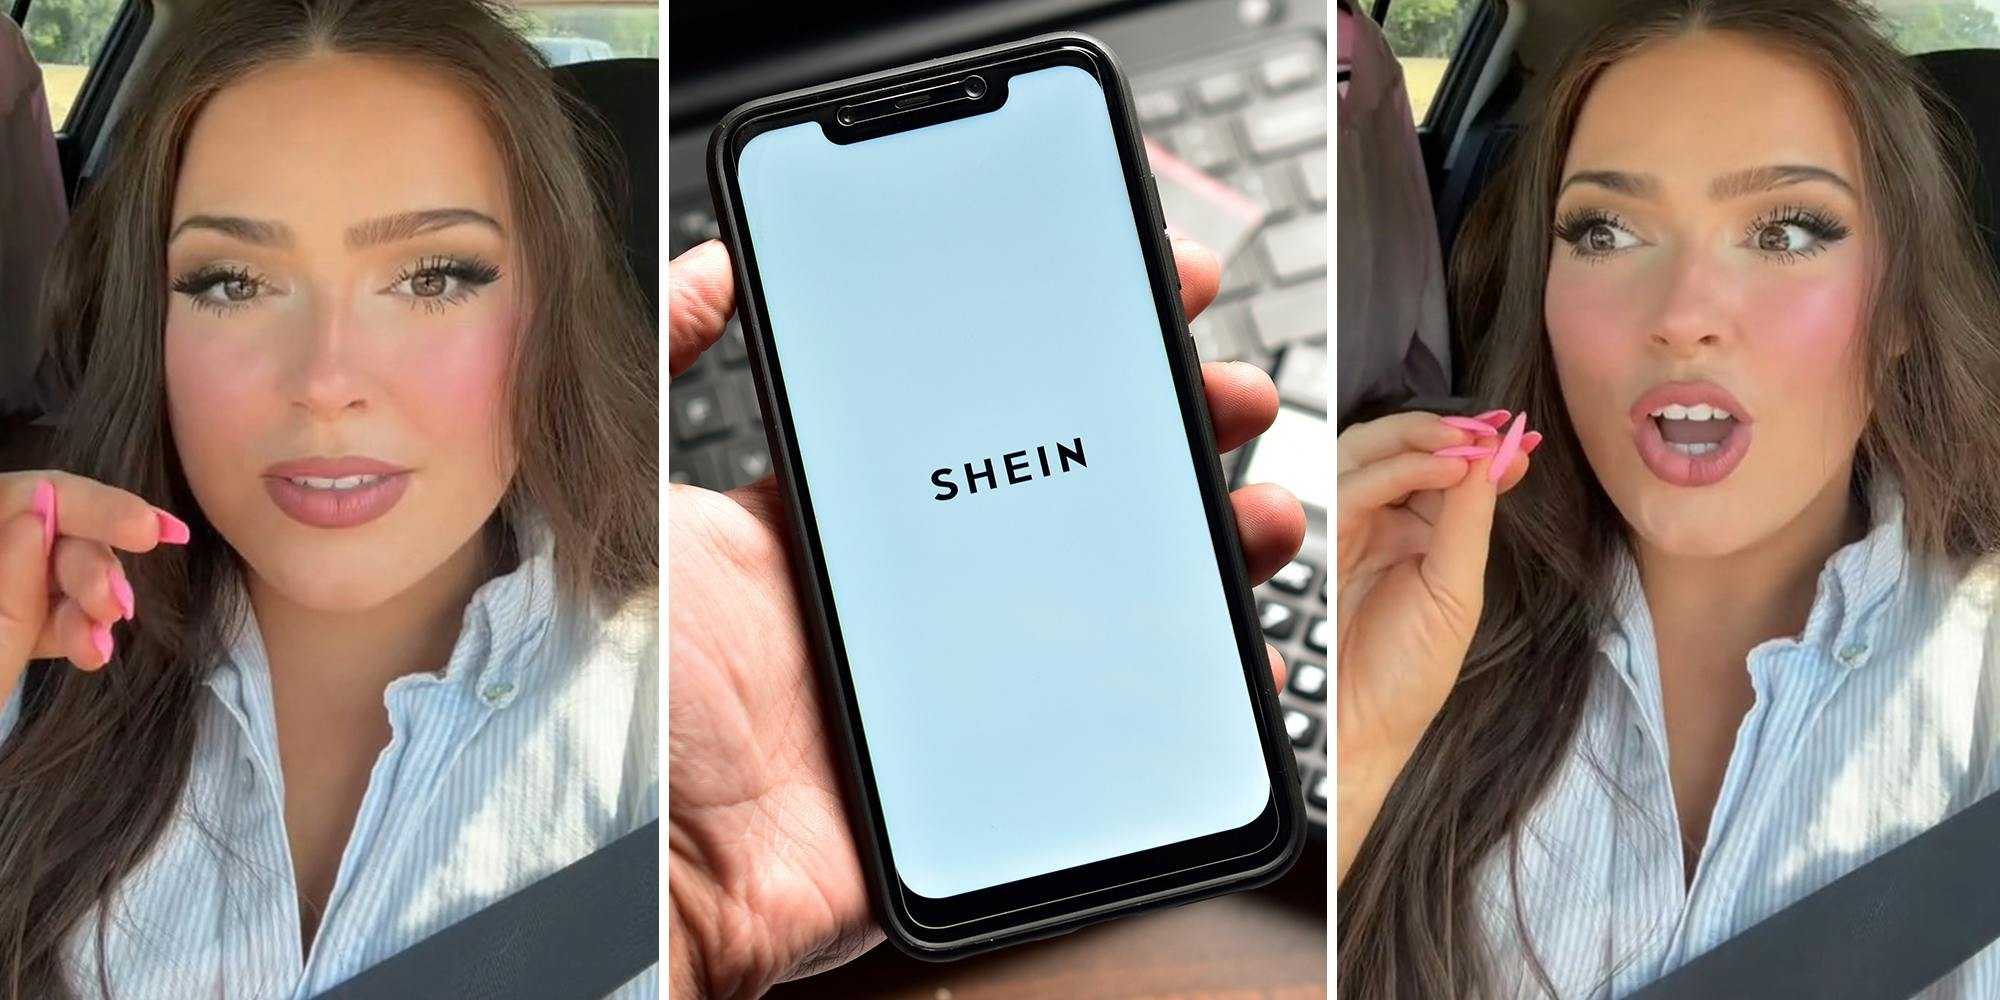 ‘Are they the same quality tho?’: Shopper reveals SHEIN now has shops for Zara, Free People, and more. Here’s how to find the dupes